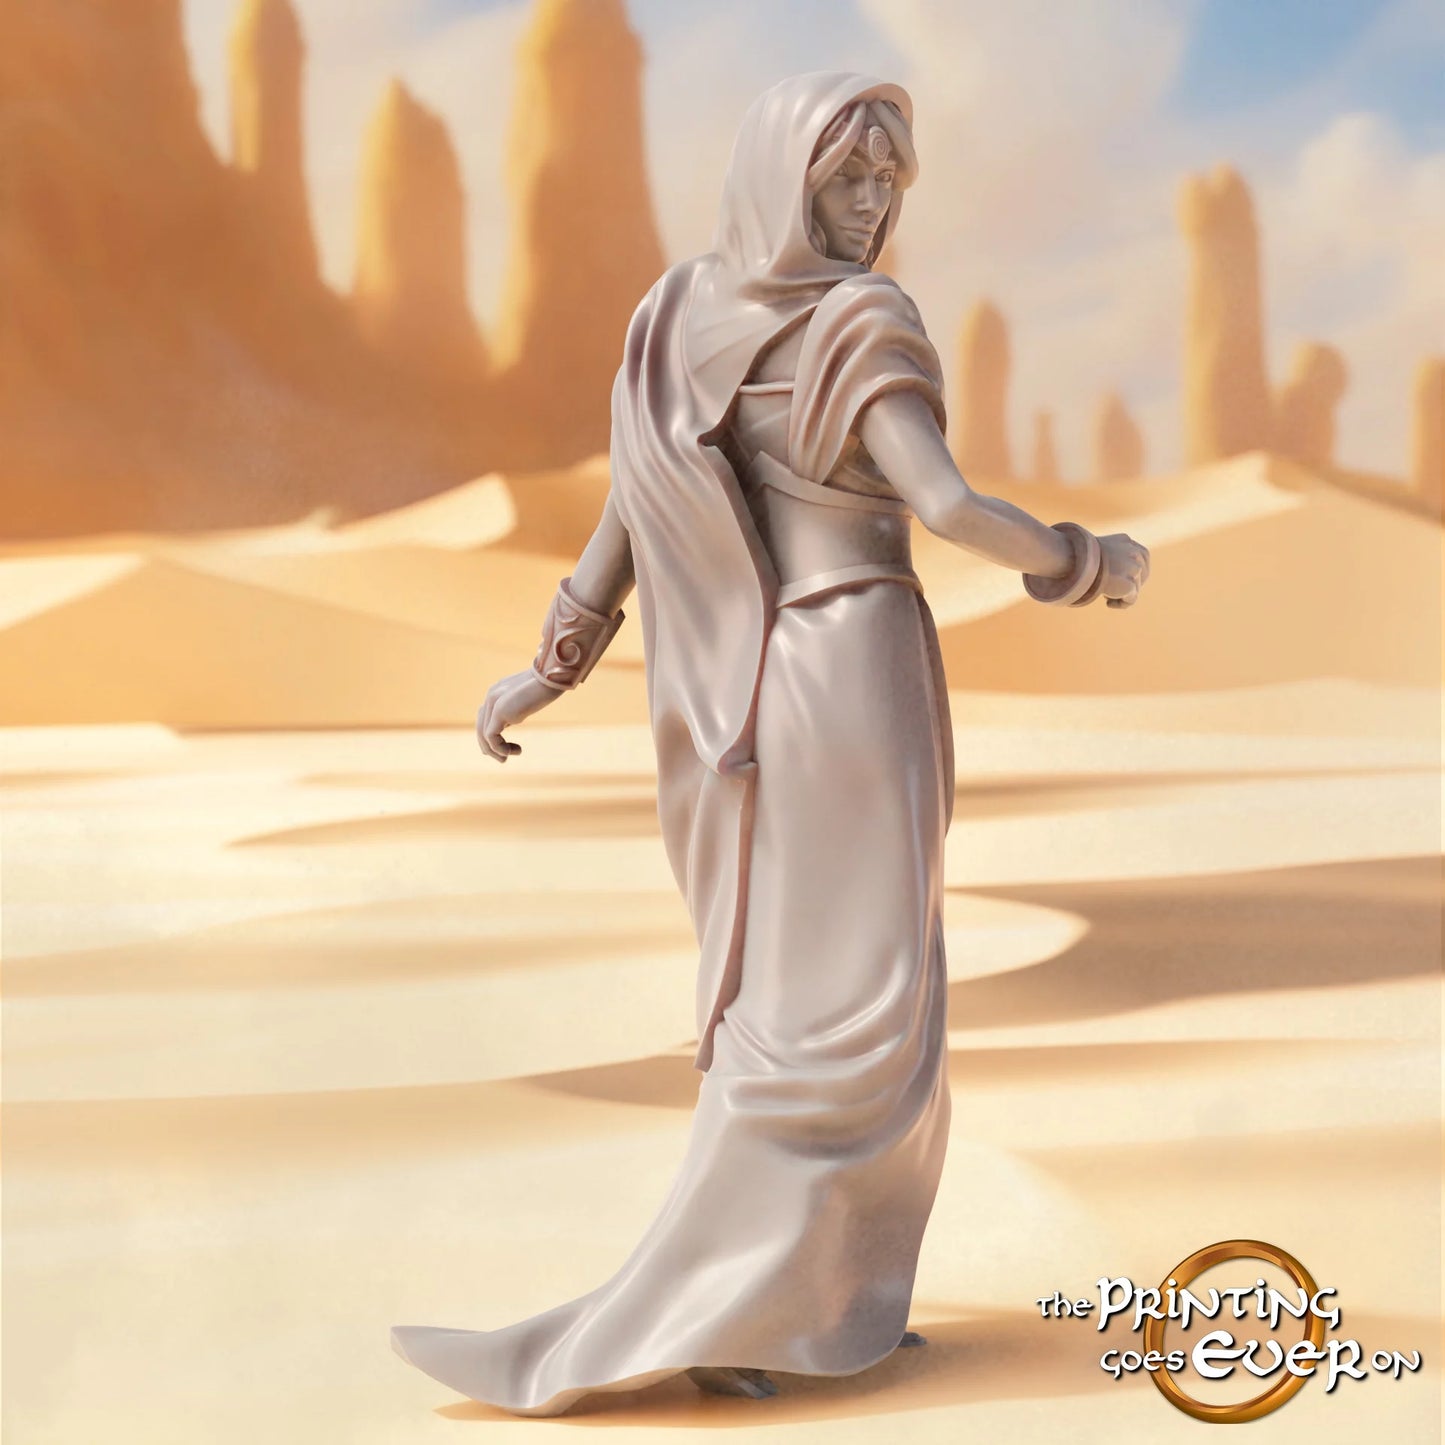 Easterner Princess – Lady and Rogue | Sands of the East | MESBG | The Printing Goes Ever On